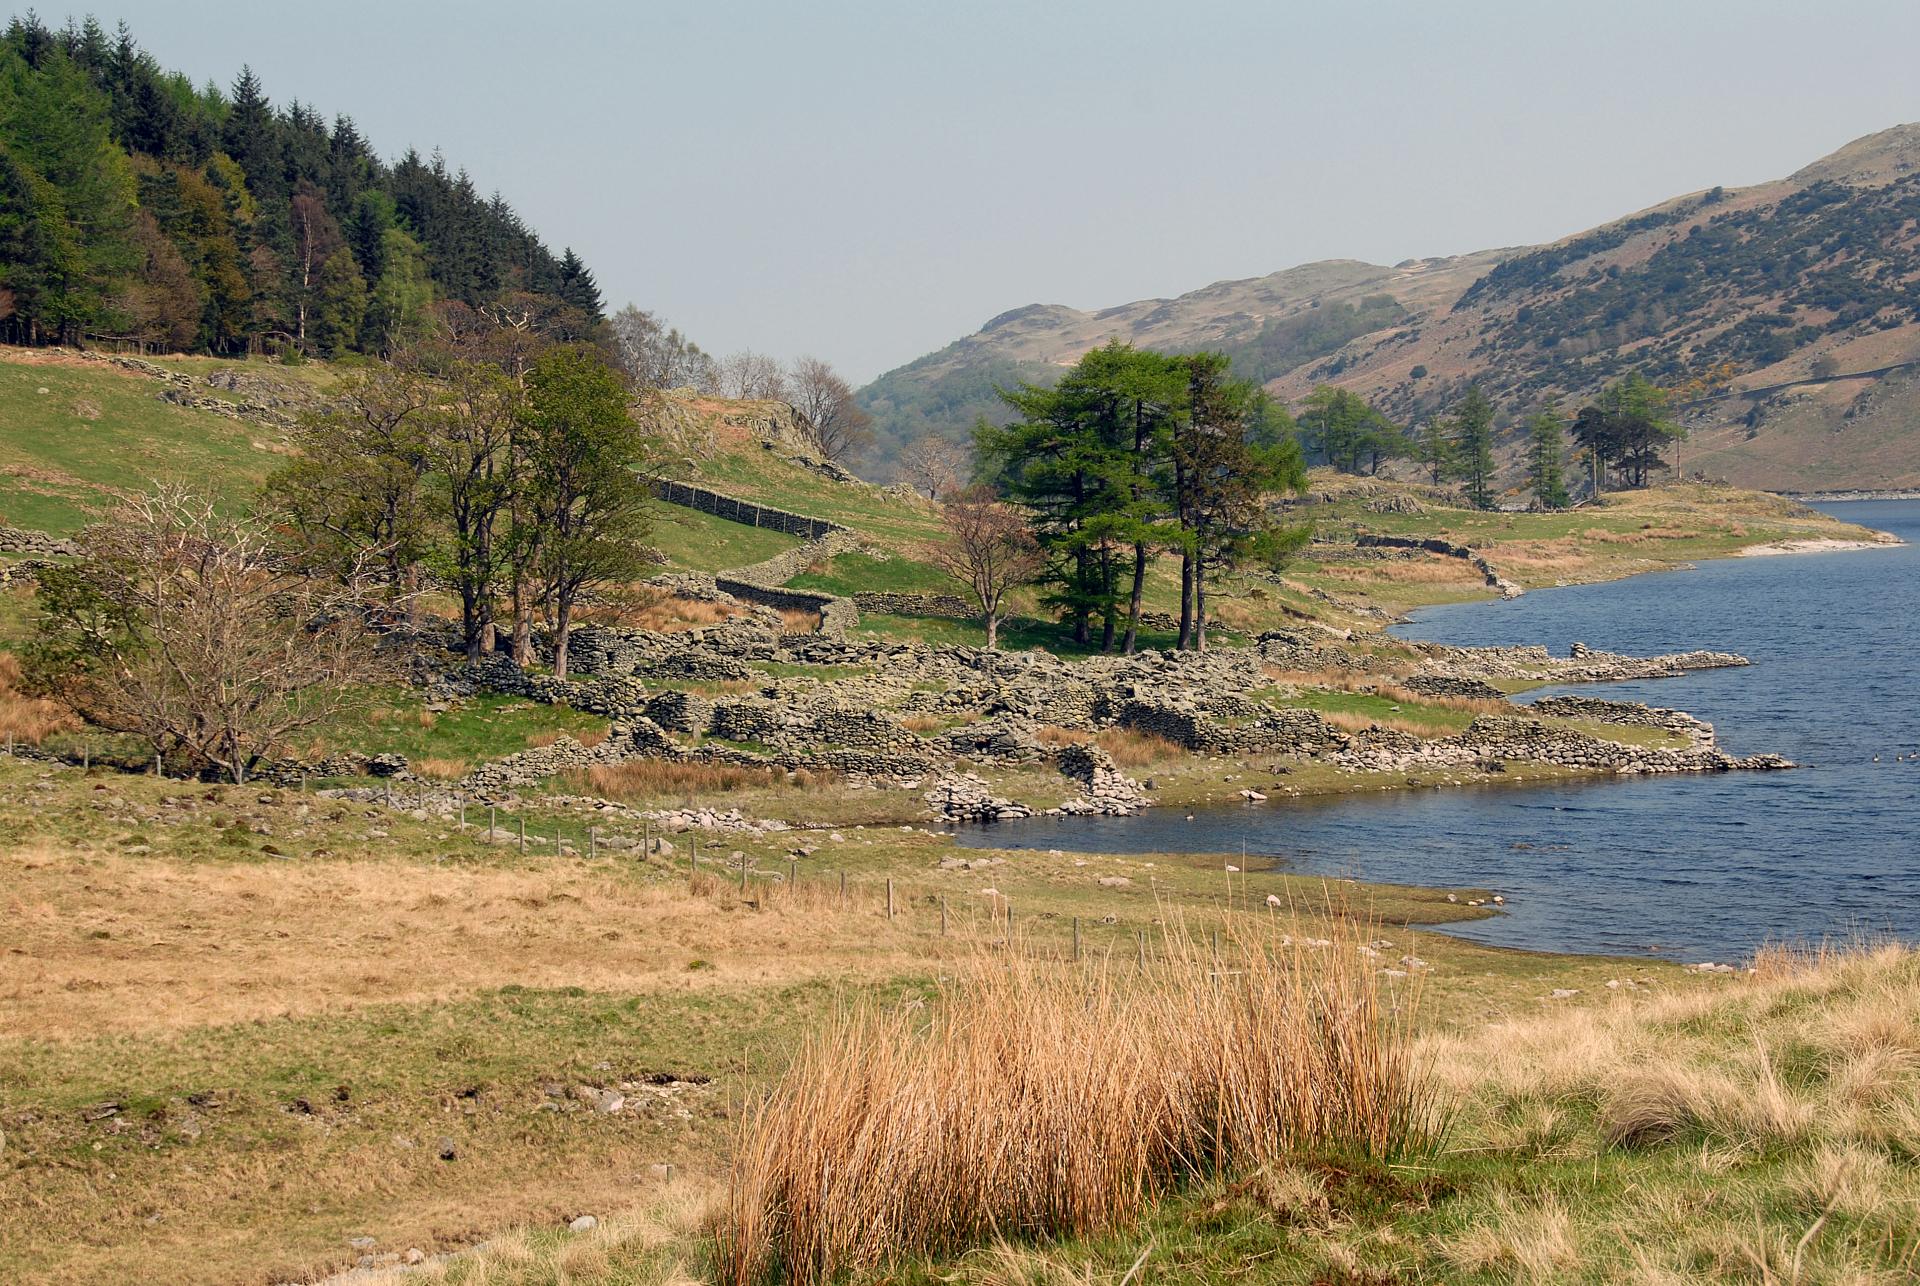 Mardale walls emerging from the lake